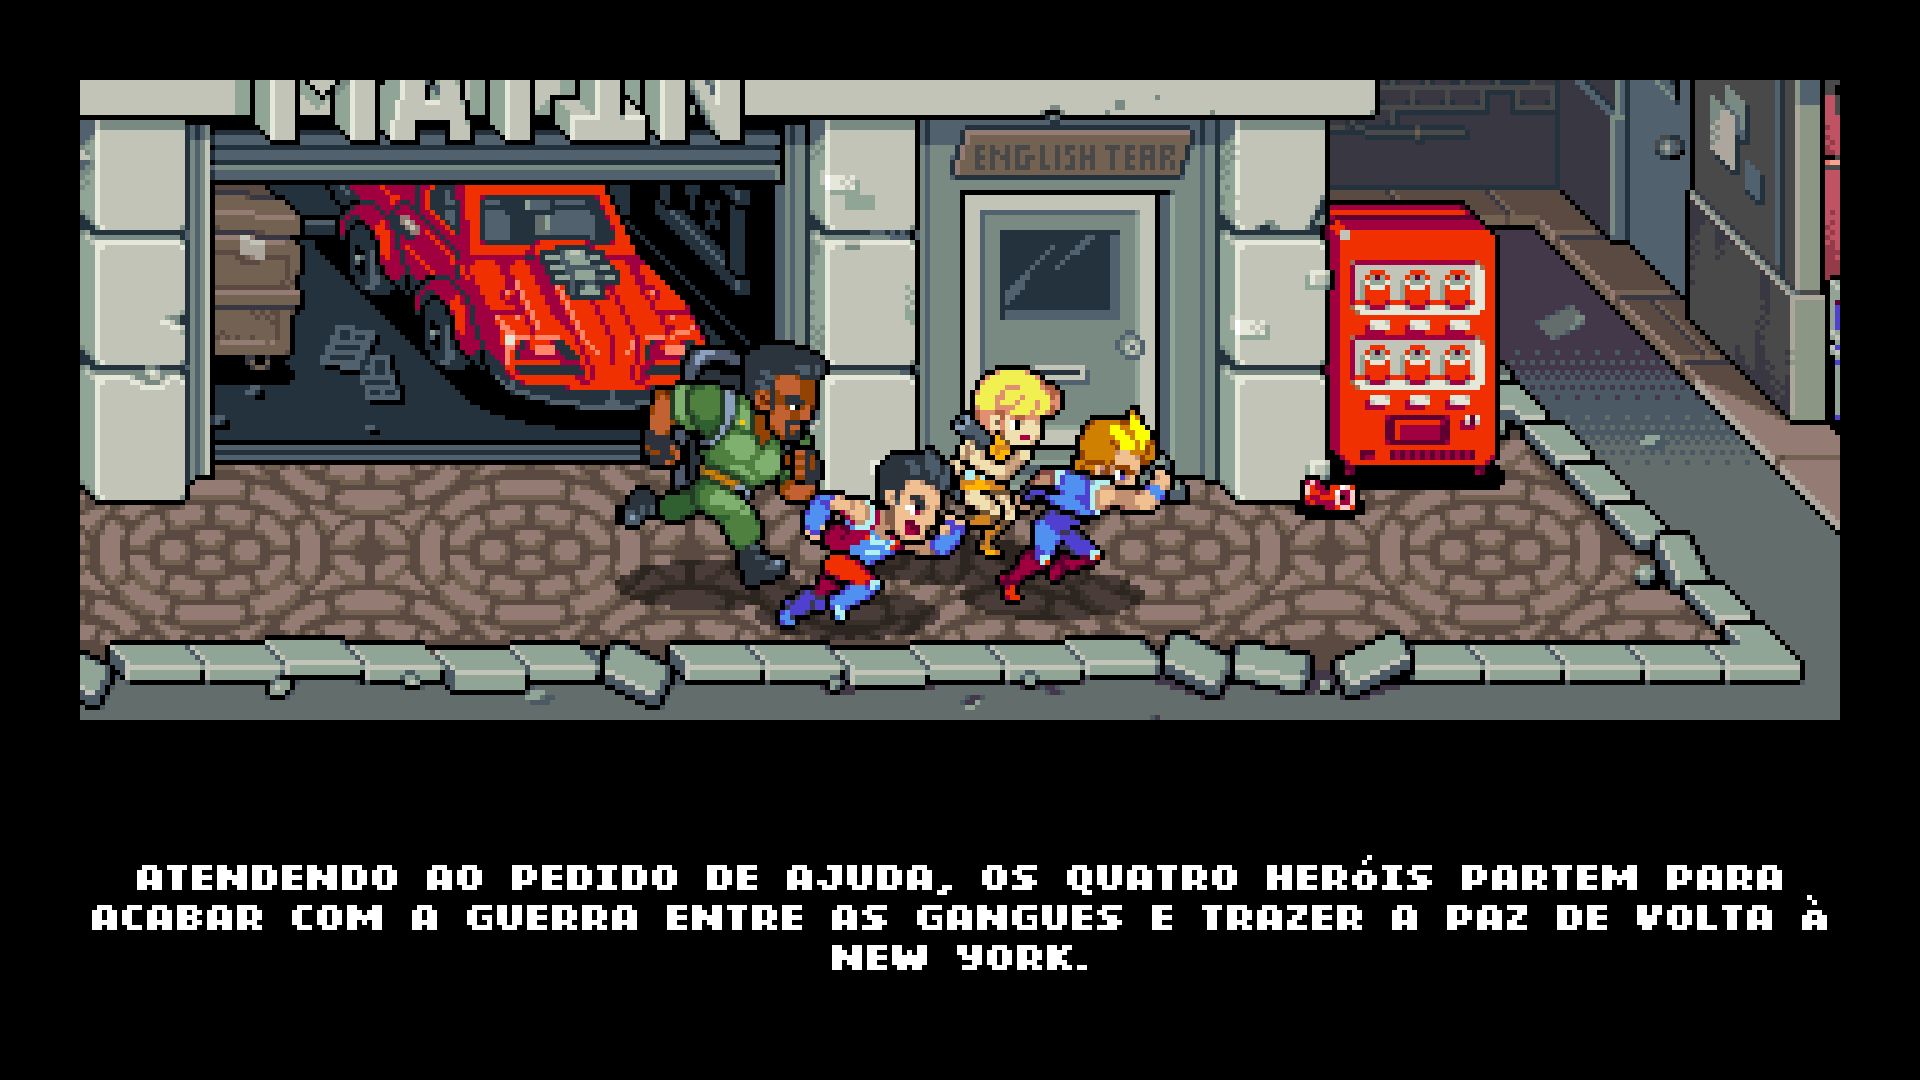 Jogo Double Dragon Gaiden: Rise Of The Dragons - Switch